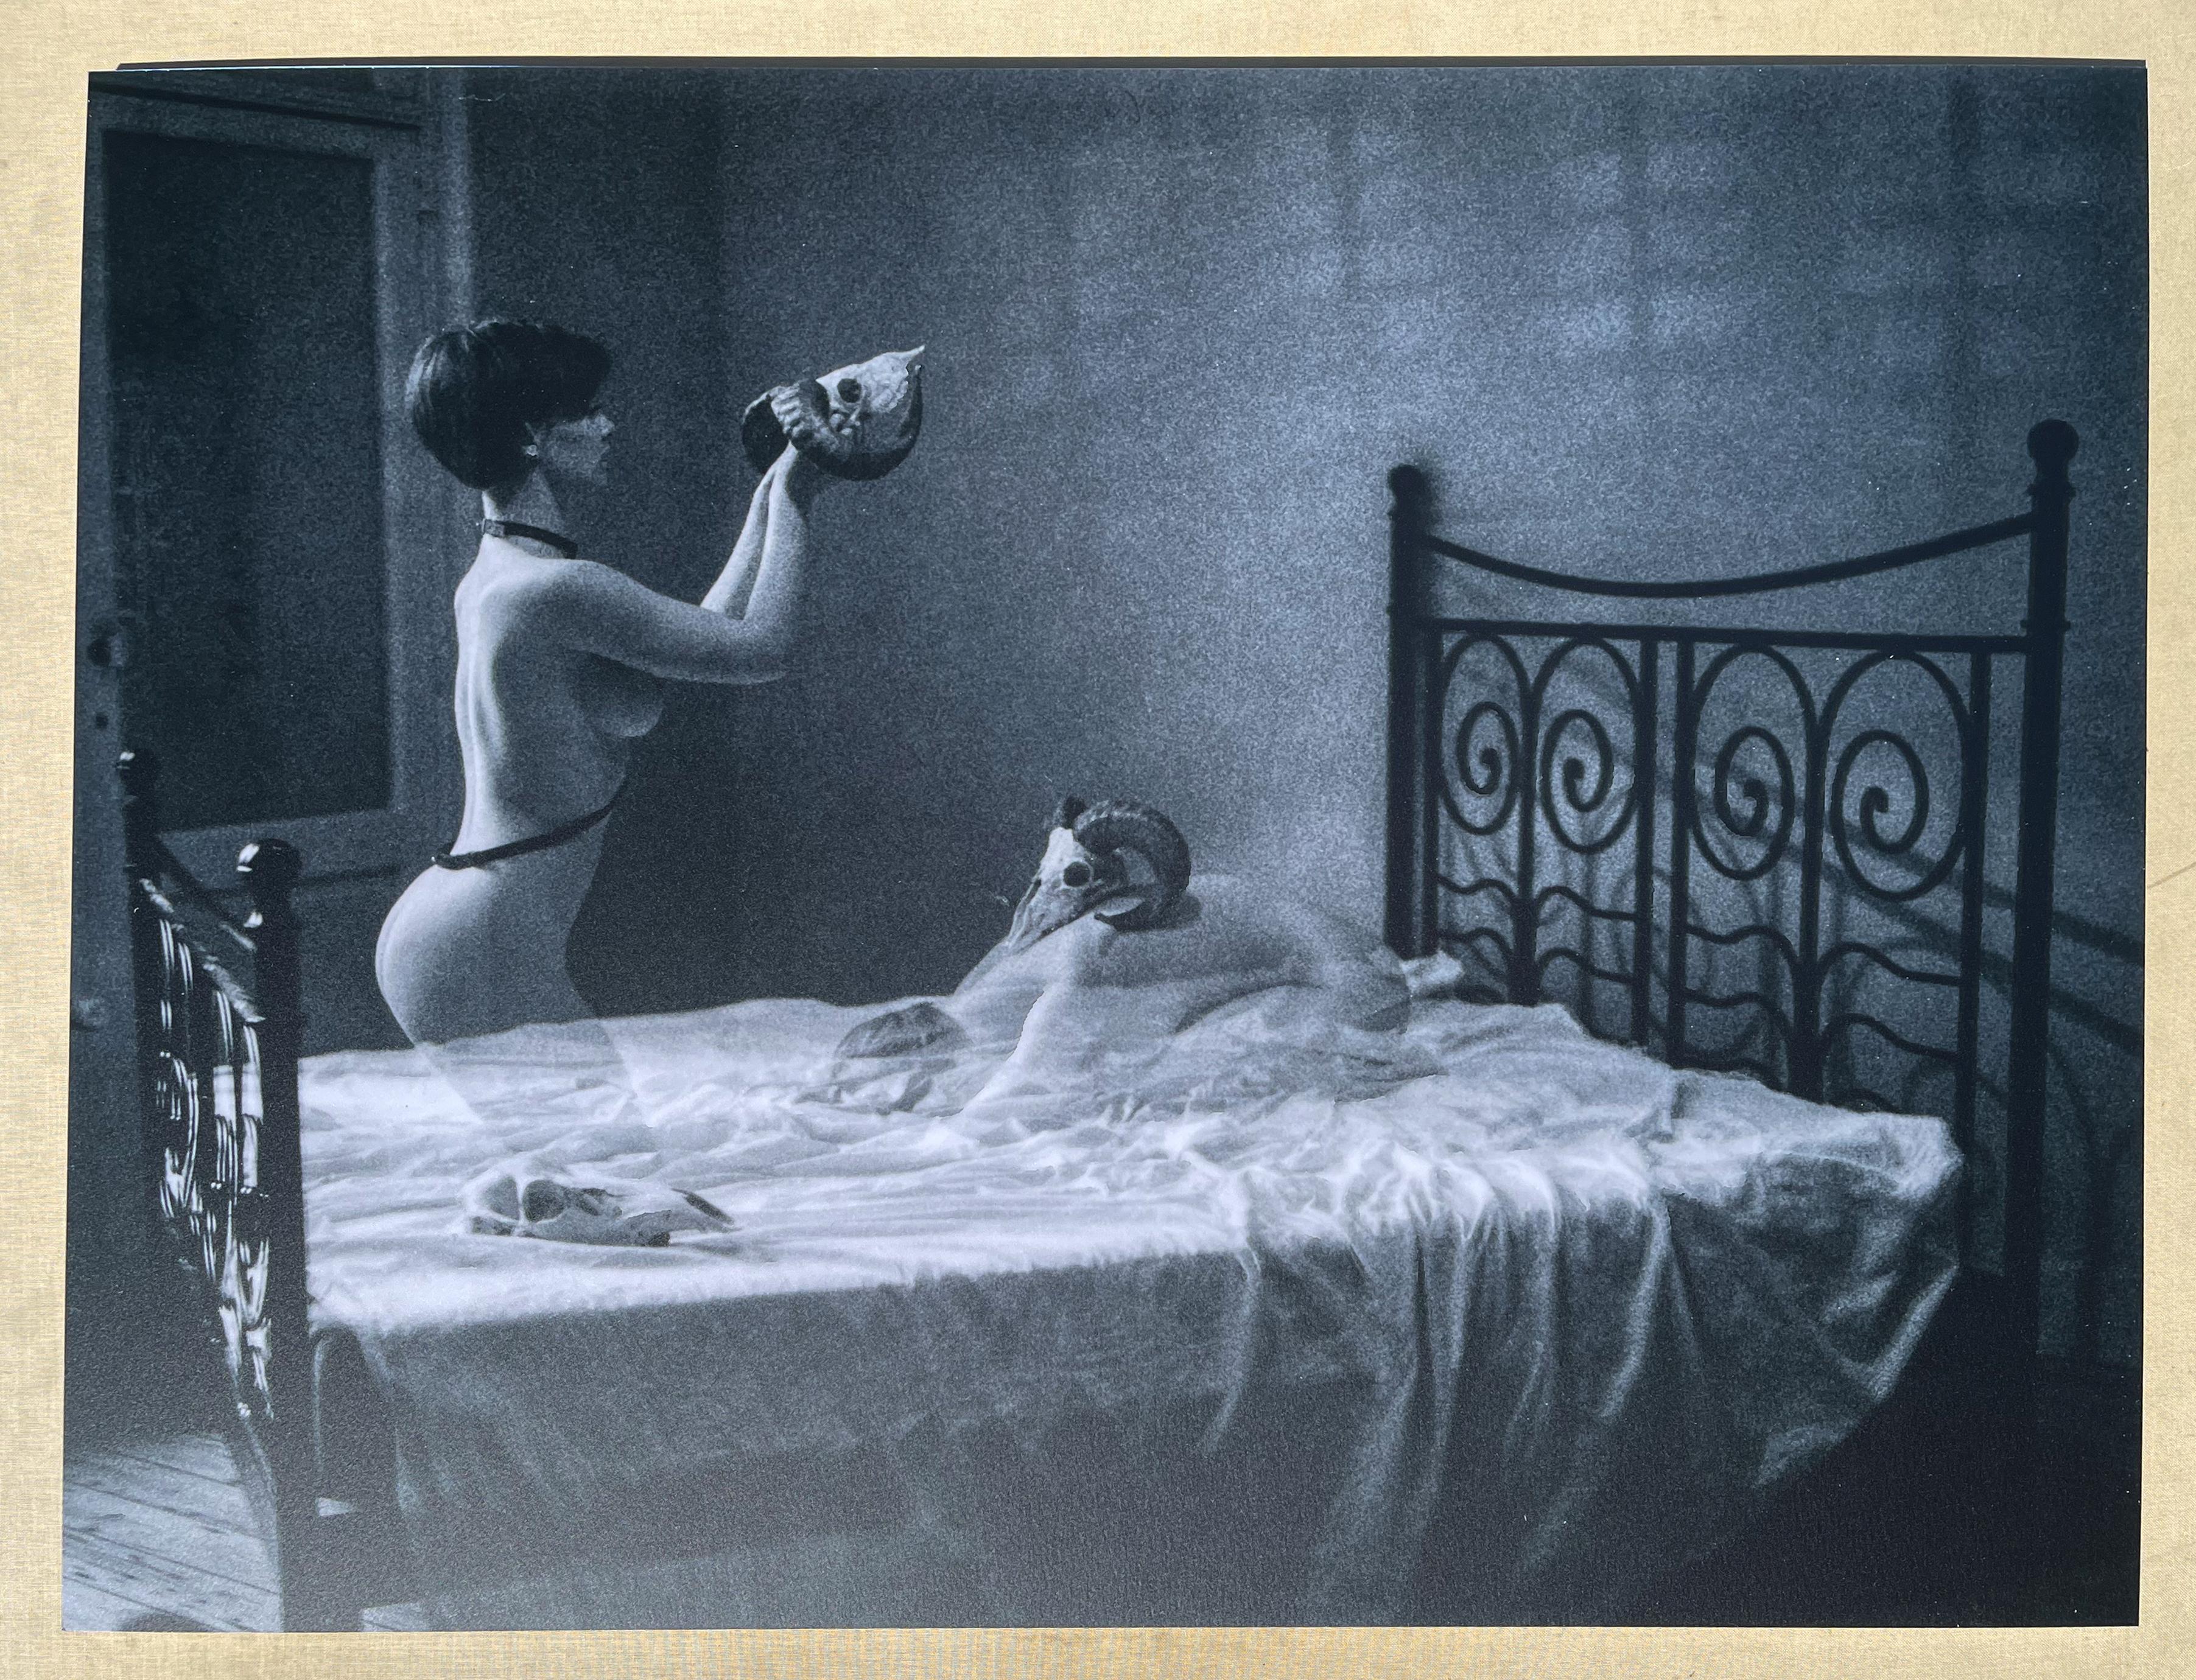 Wicca - mounted - 21st Century, Polaroid, Nude Photography 1